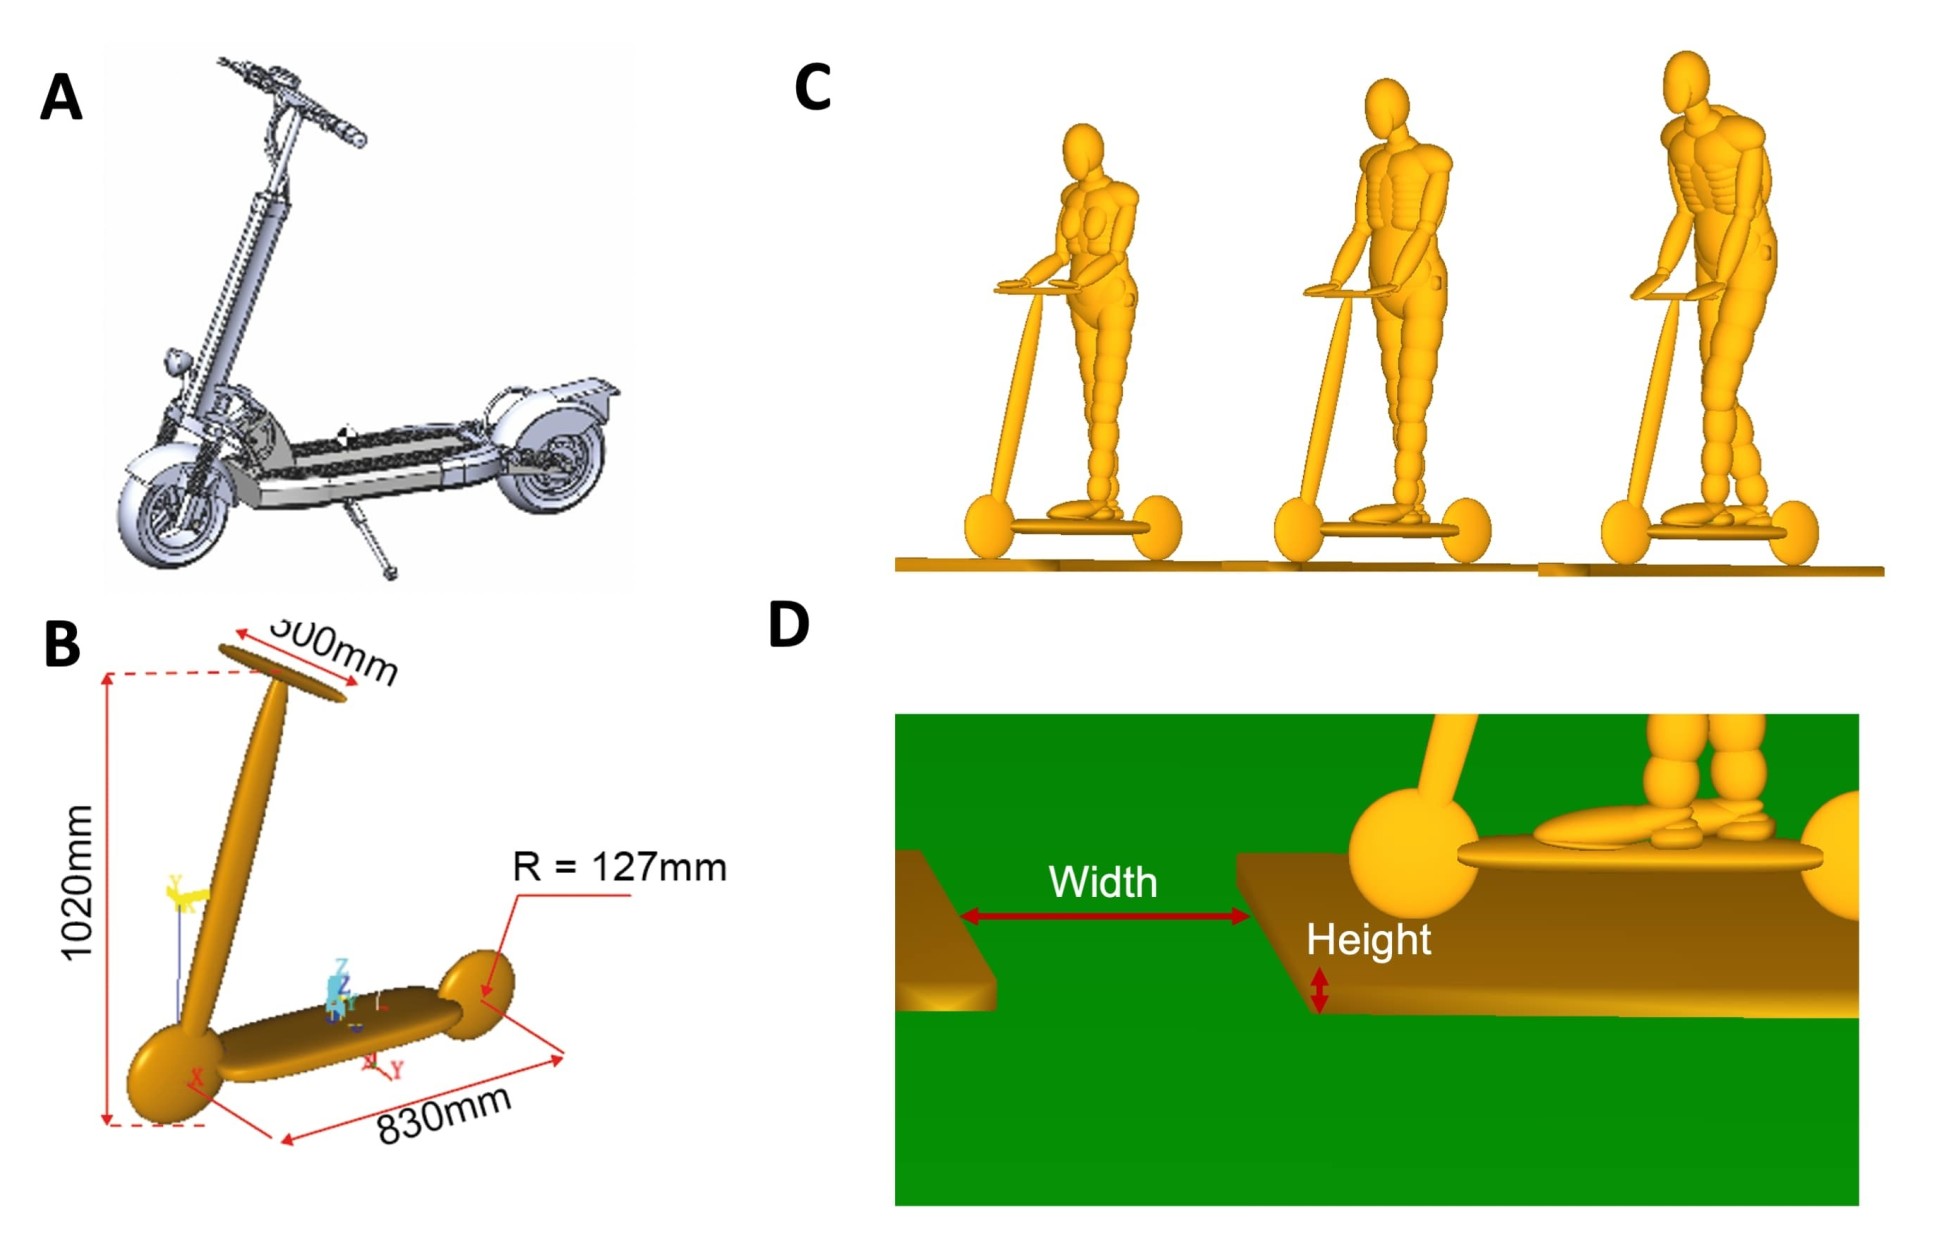 Diagrams of the computer models, showing the scooter, three human bodies of different sizes on said scooter, and the pothole size compared to the scooter wheel